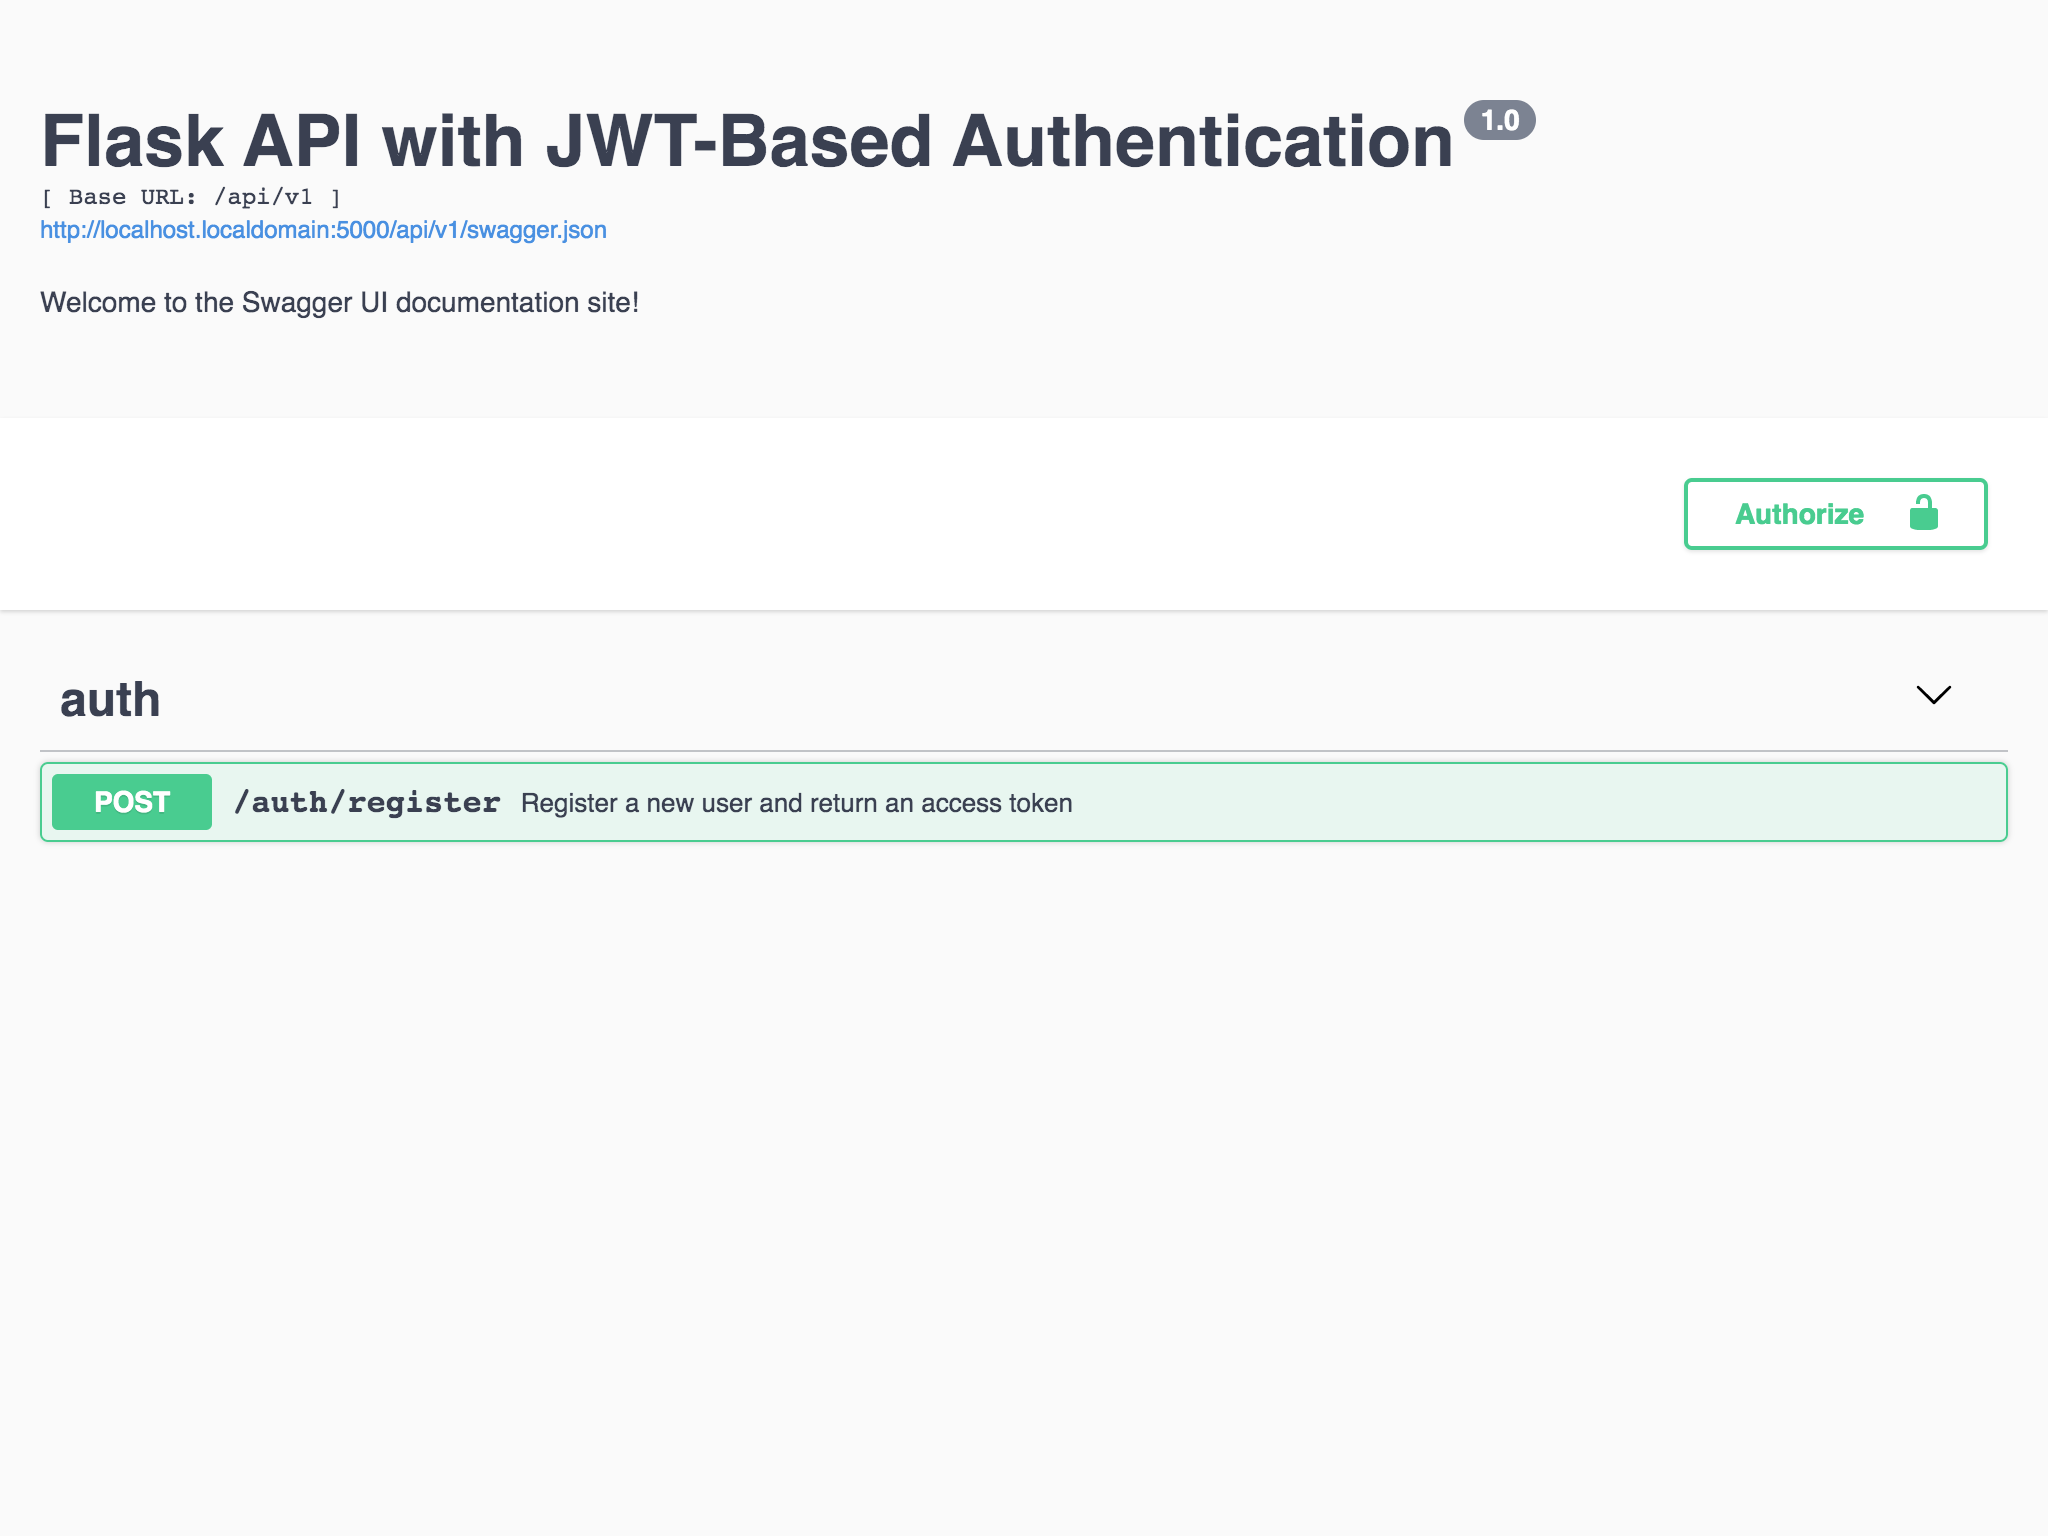 How To: Create a Flask API with JWT-Based Authentication (Part 3)